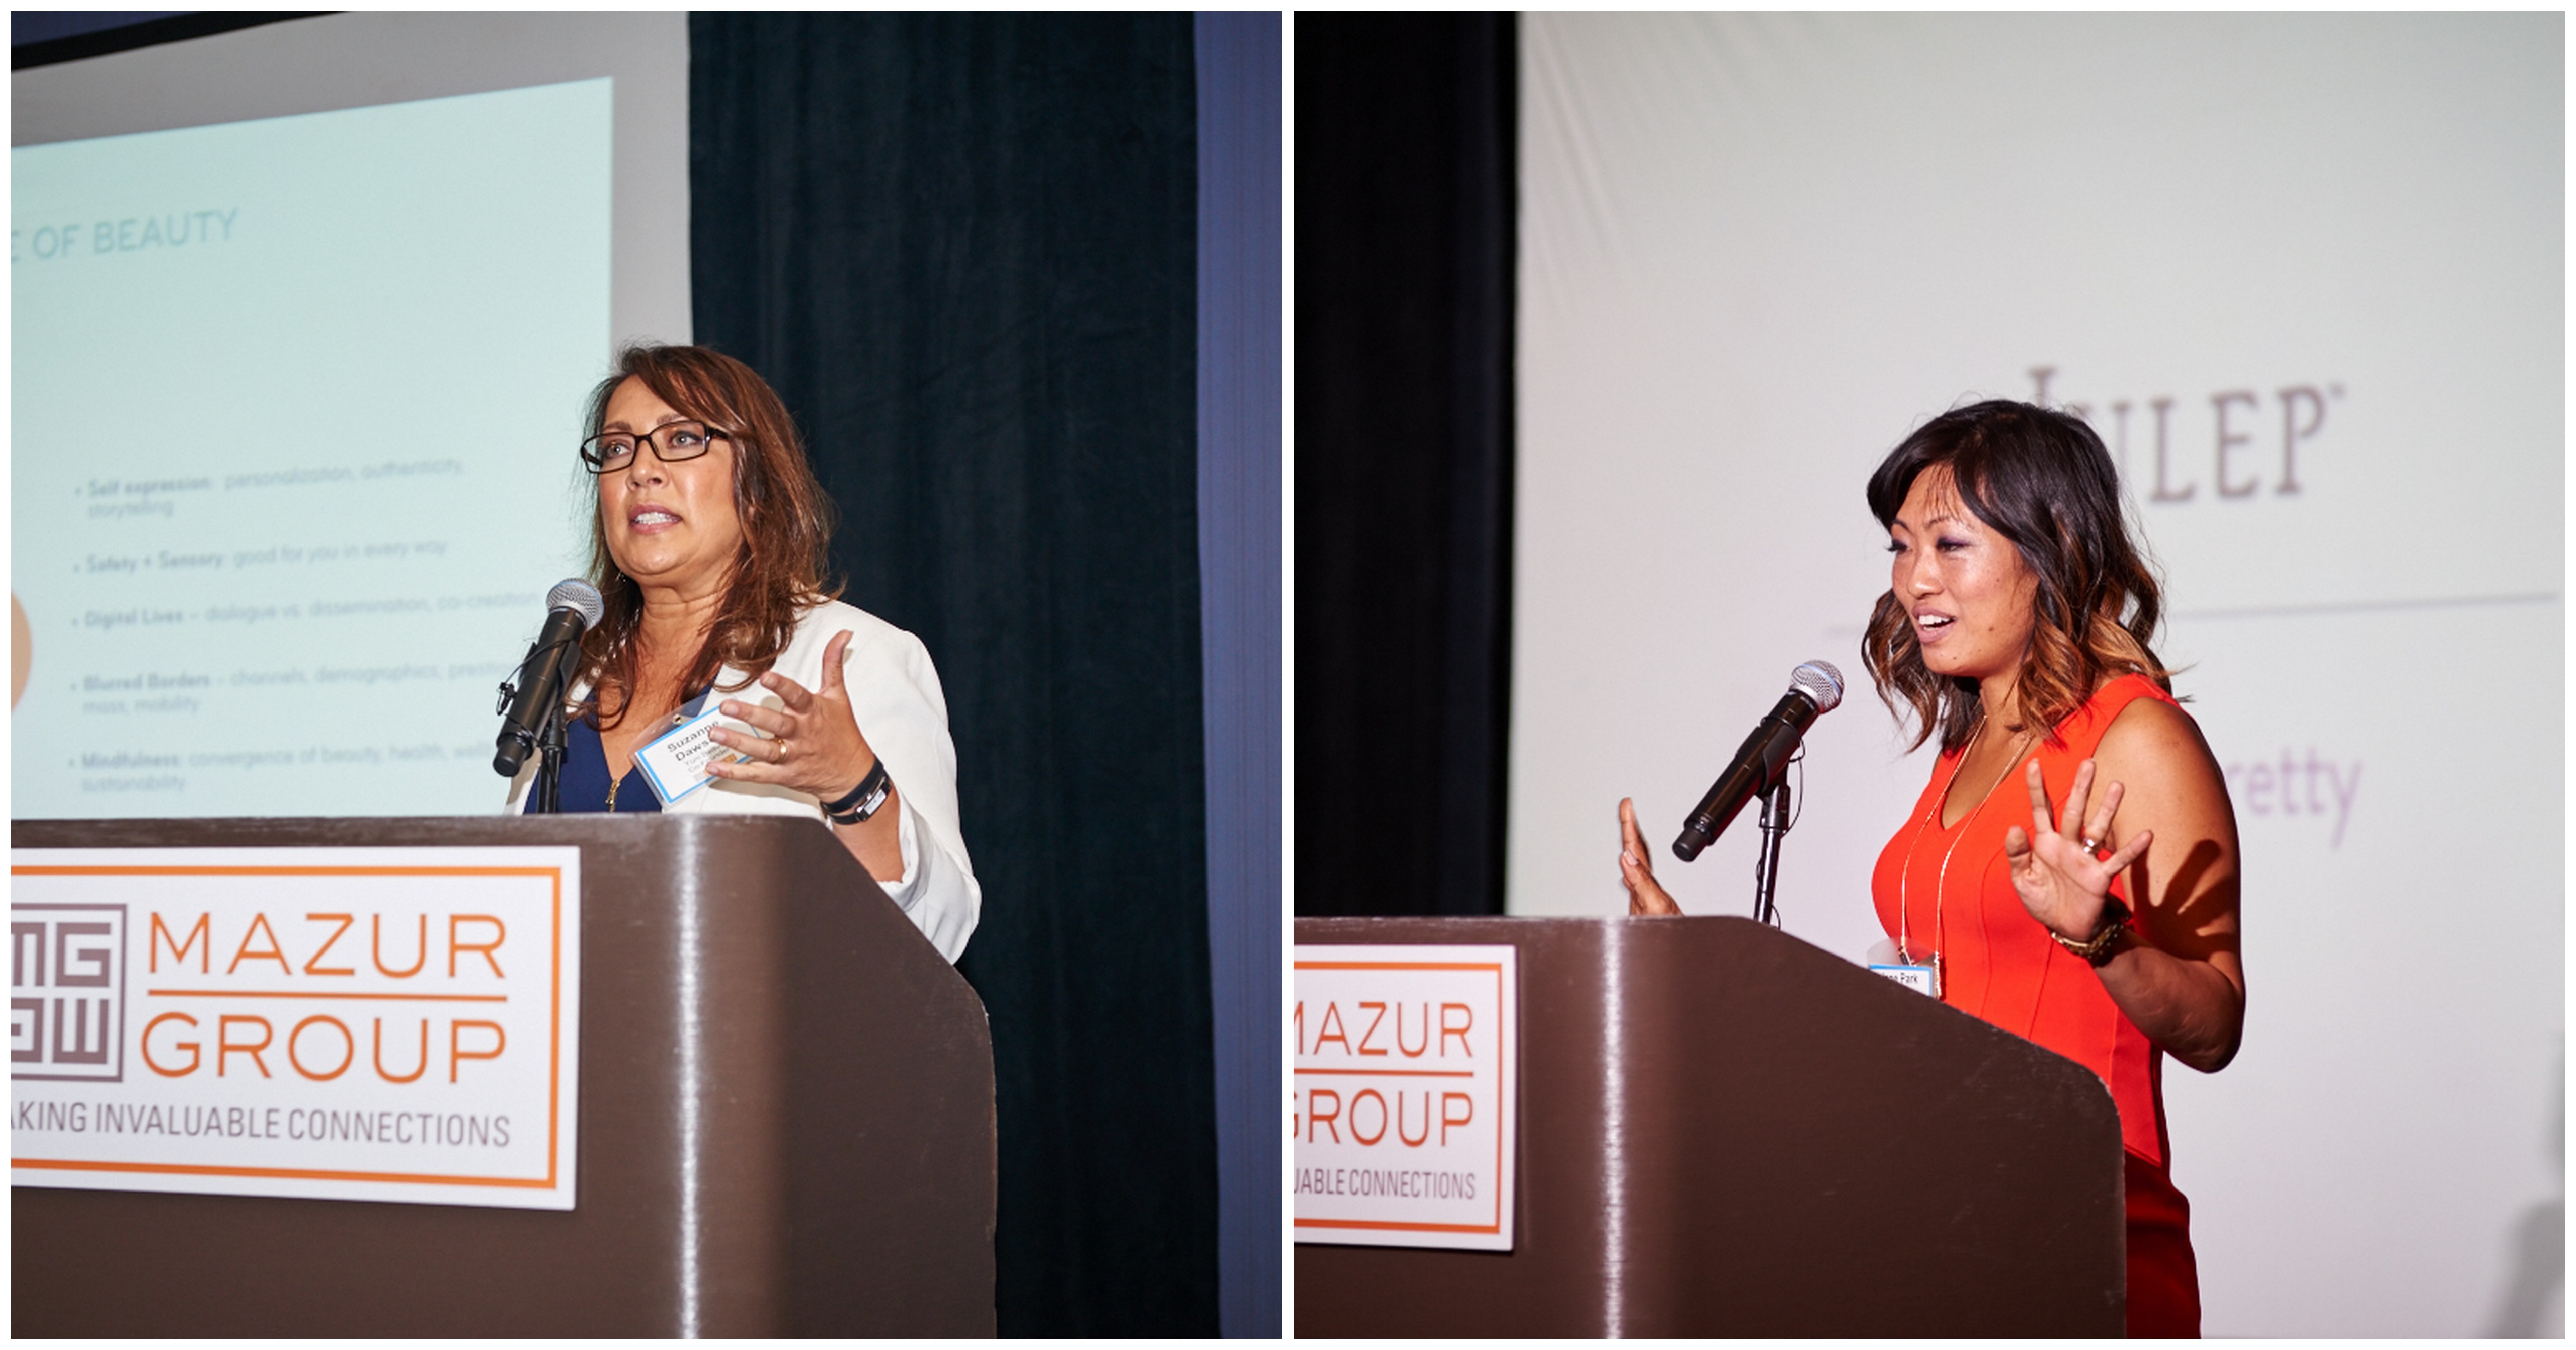 BBR13 Keynote Speakers (l to r): Suzanne Dawson (Founder, YUNI Beauty) - "YOUniverse: A Key to Next Generation Beauty", and Jane Park (CEO & Founder, Julep) - "Inviting Customers to Become Co-Creators"